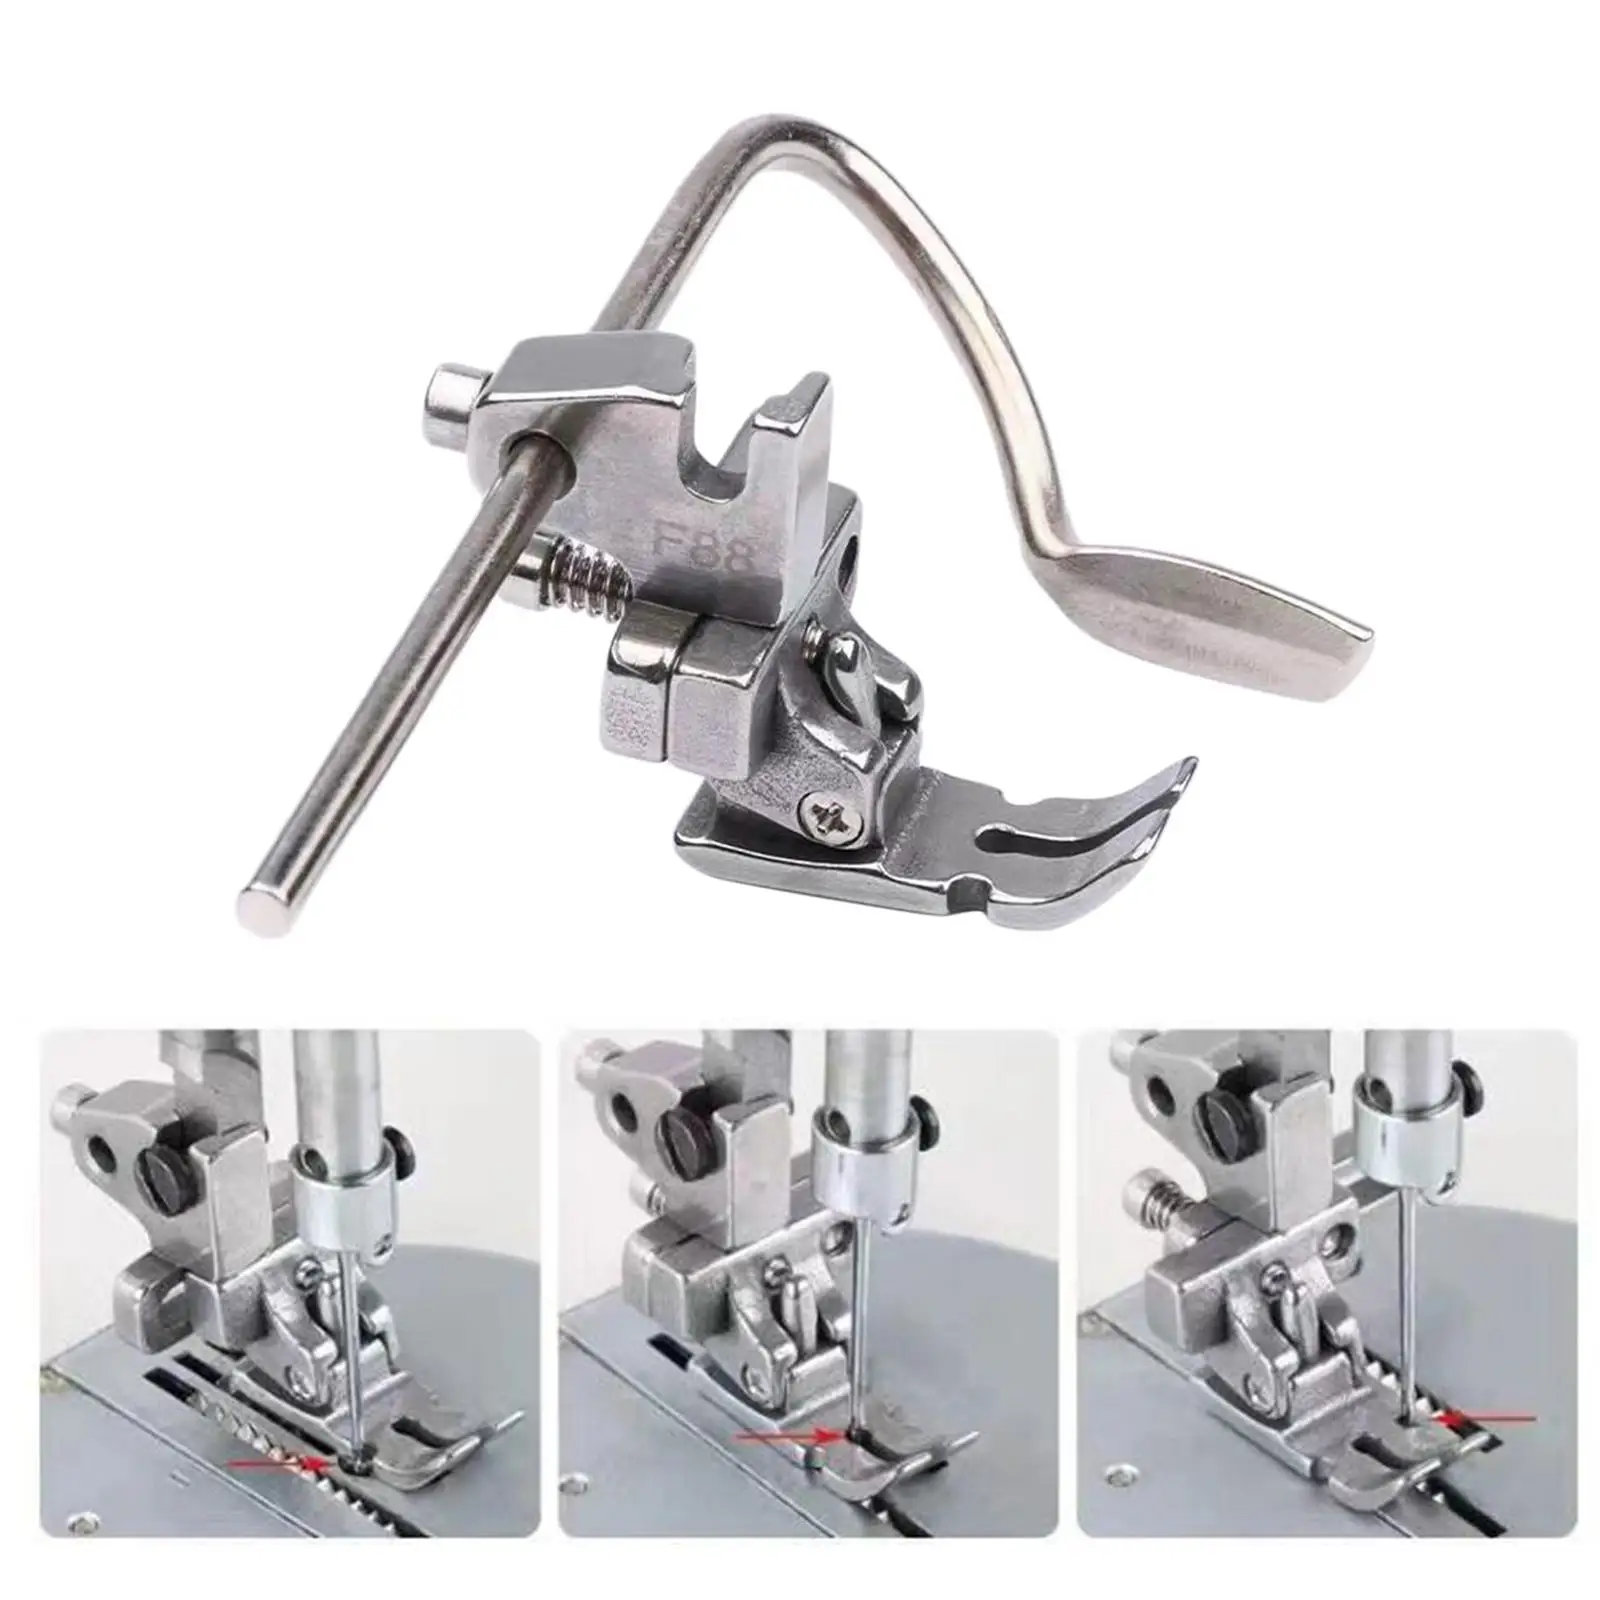 Presser Foot for Sewing Machine Quilting Patchwork Presser Foot for Bag Sewing DIY Arts Crafts Sewing Apparel Leather Crafts